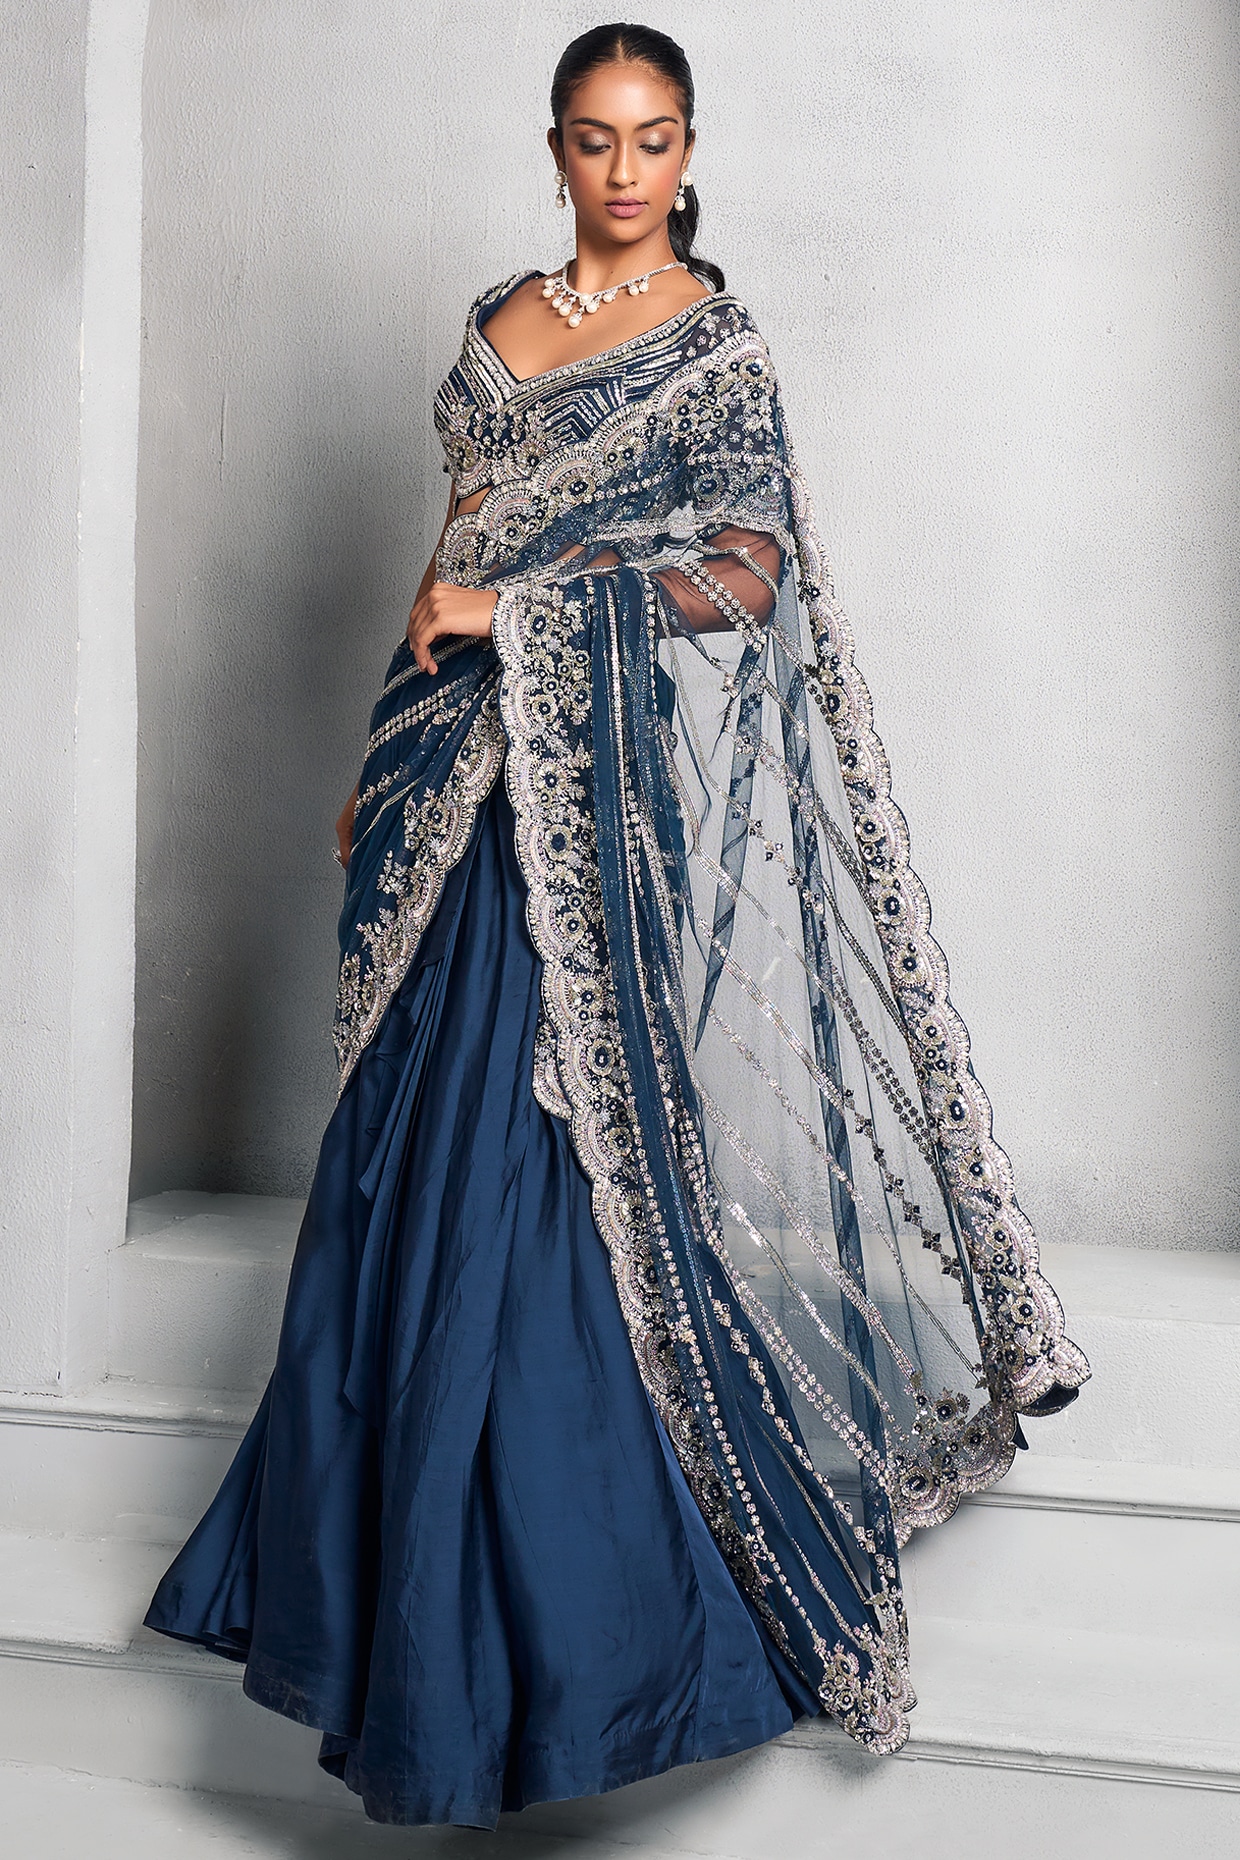 Designer Party Wear Lehenga Saree at Rs.2100/Piece in bhuj-kutch offer by  Sangeet Fashion Hub